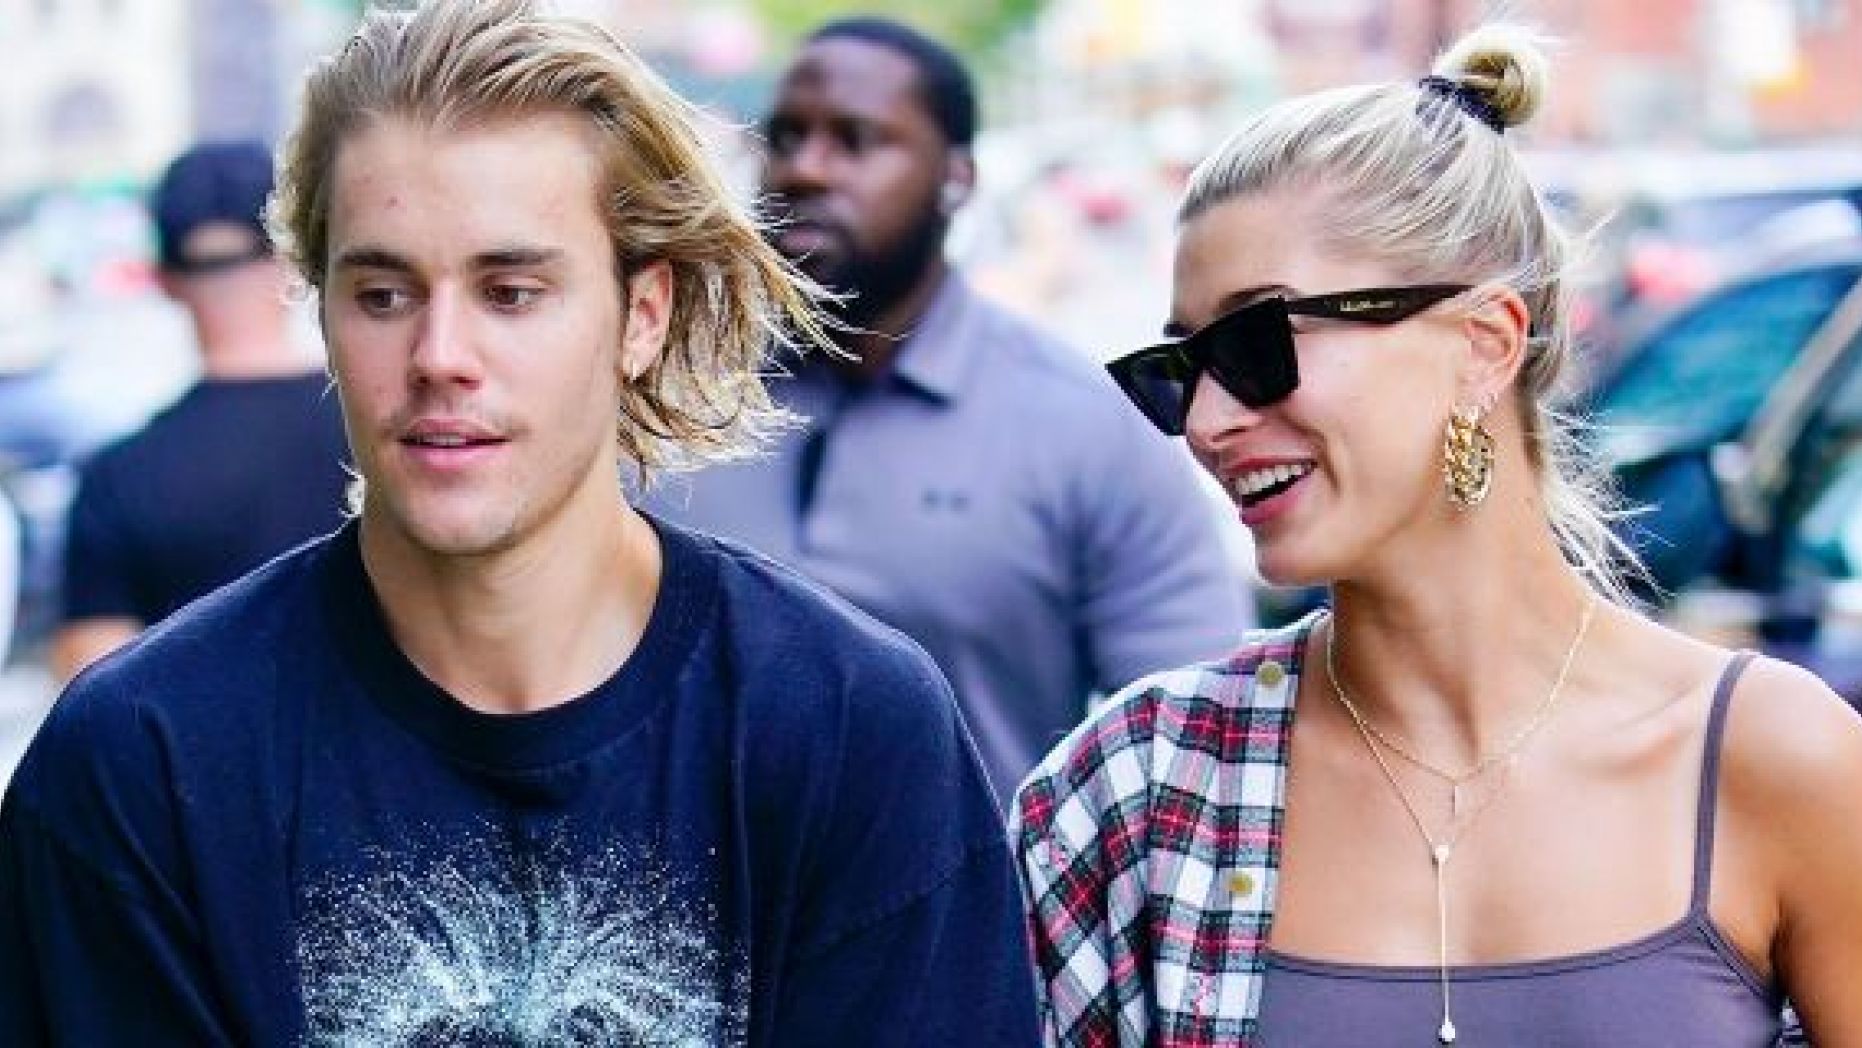 Hailey Baldwin has filed to trademark her new last name, "Beiber" for potential commercial opportunities. 